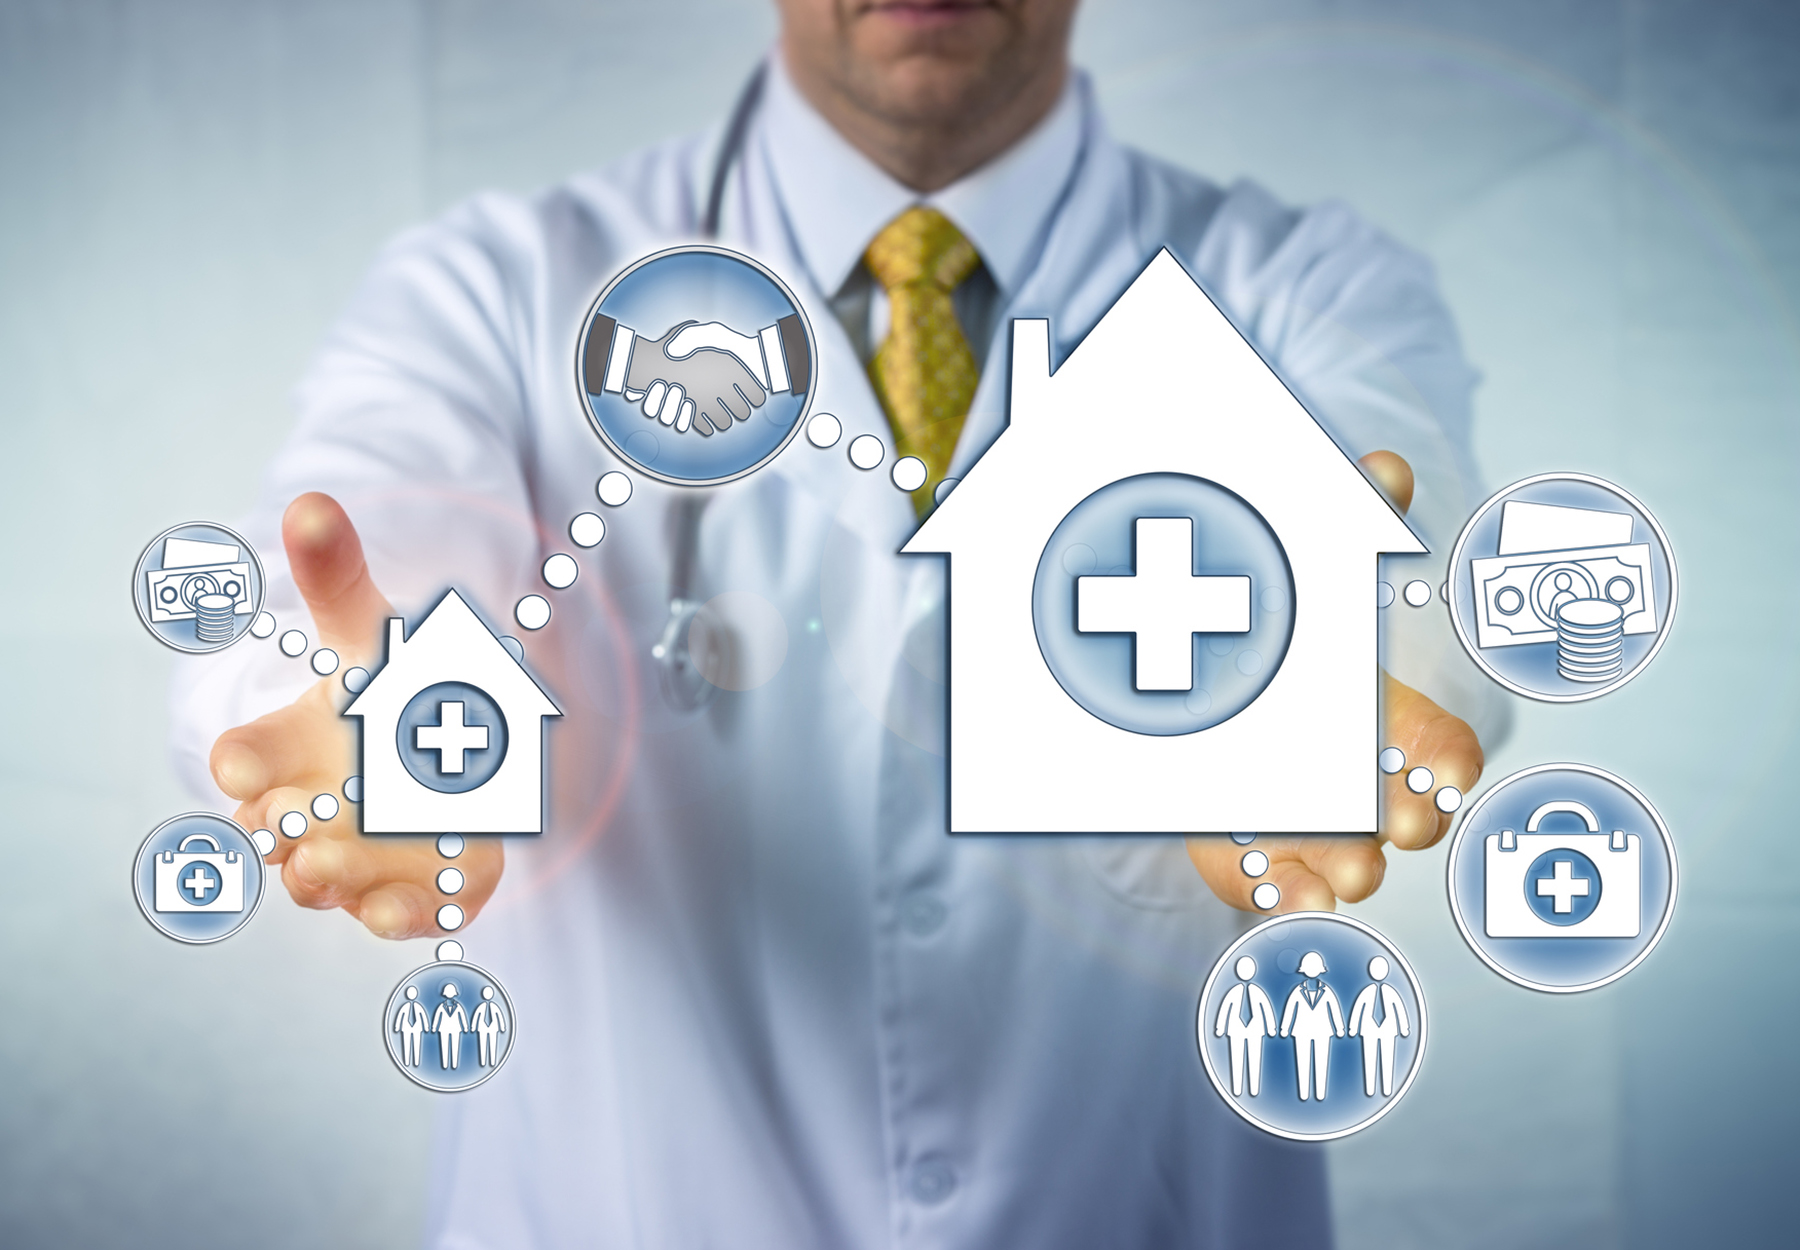 Stock photo illustration with doctor behind several healthcare-related icons meant to represent healthcare consolidation